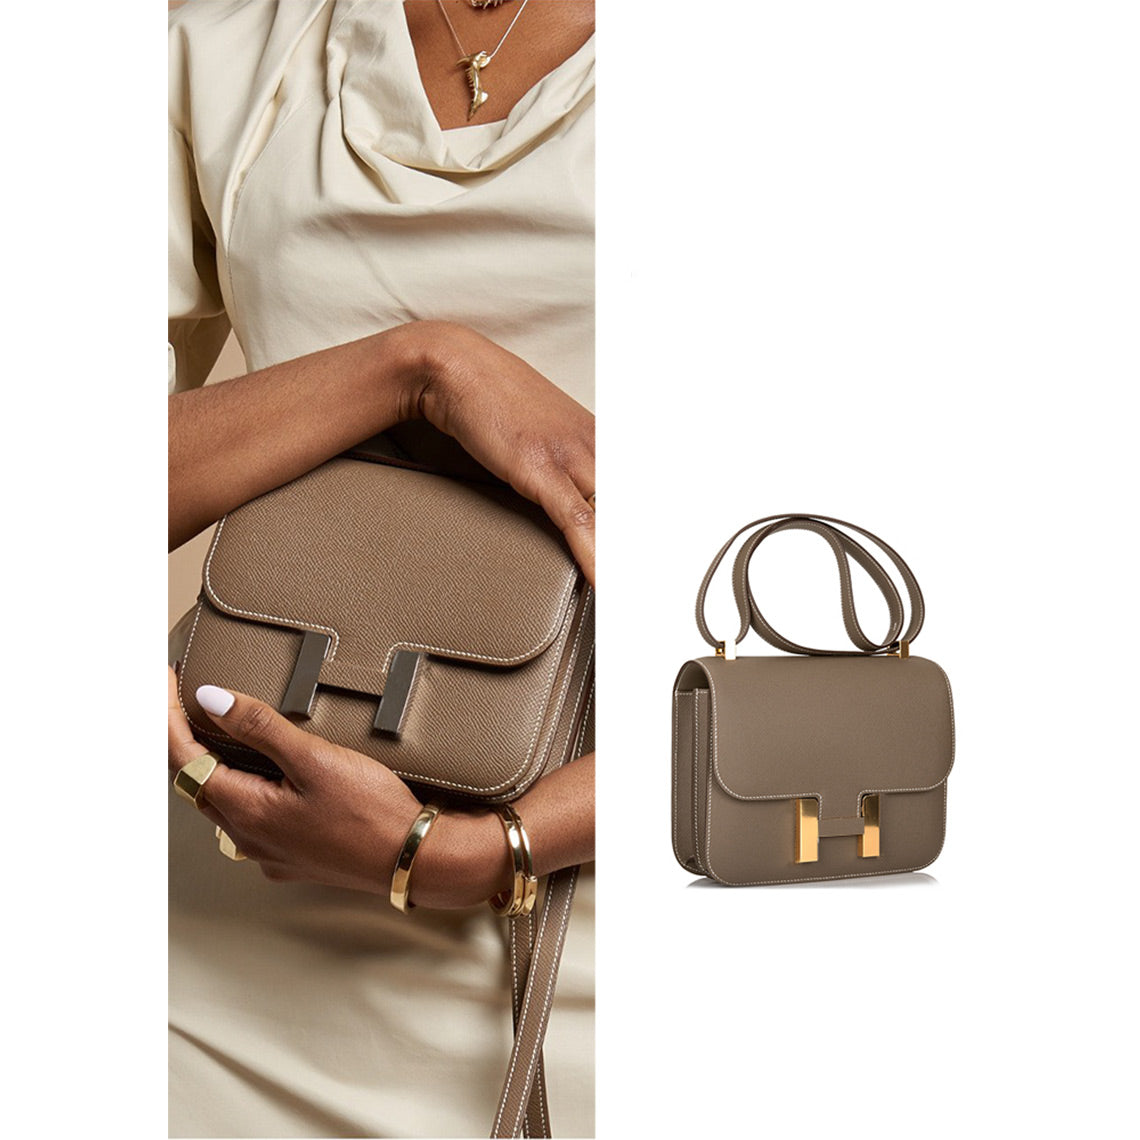 A Leather Kit to Make Your Own Luxury Bag - POPSEWING®